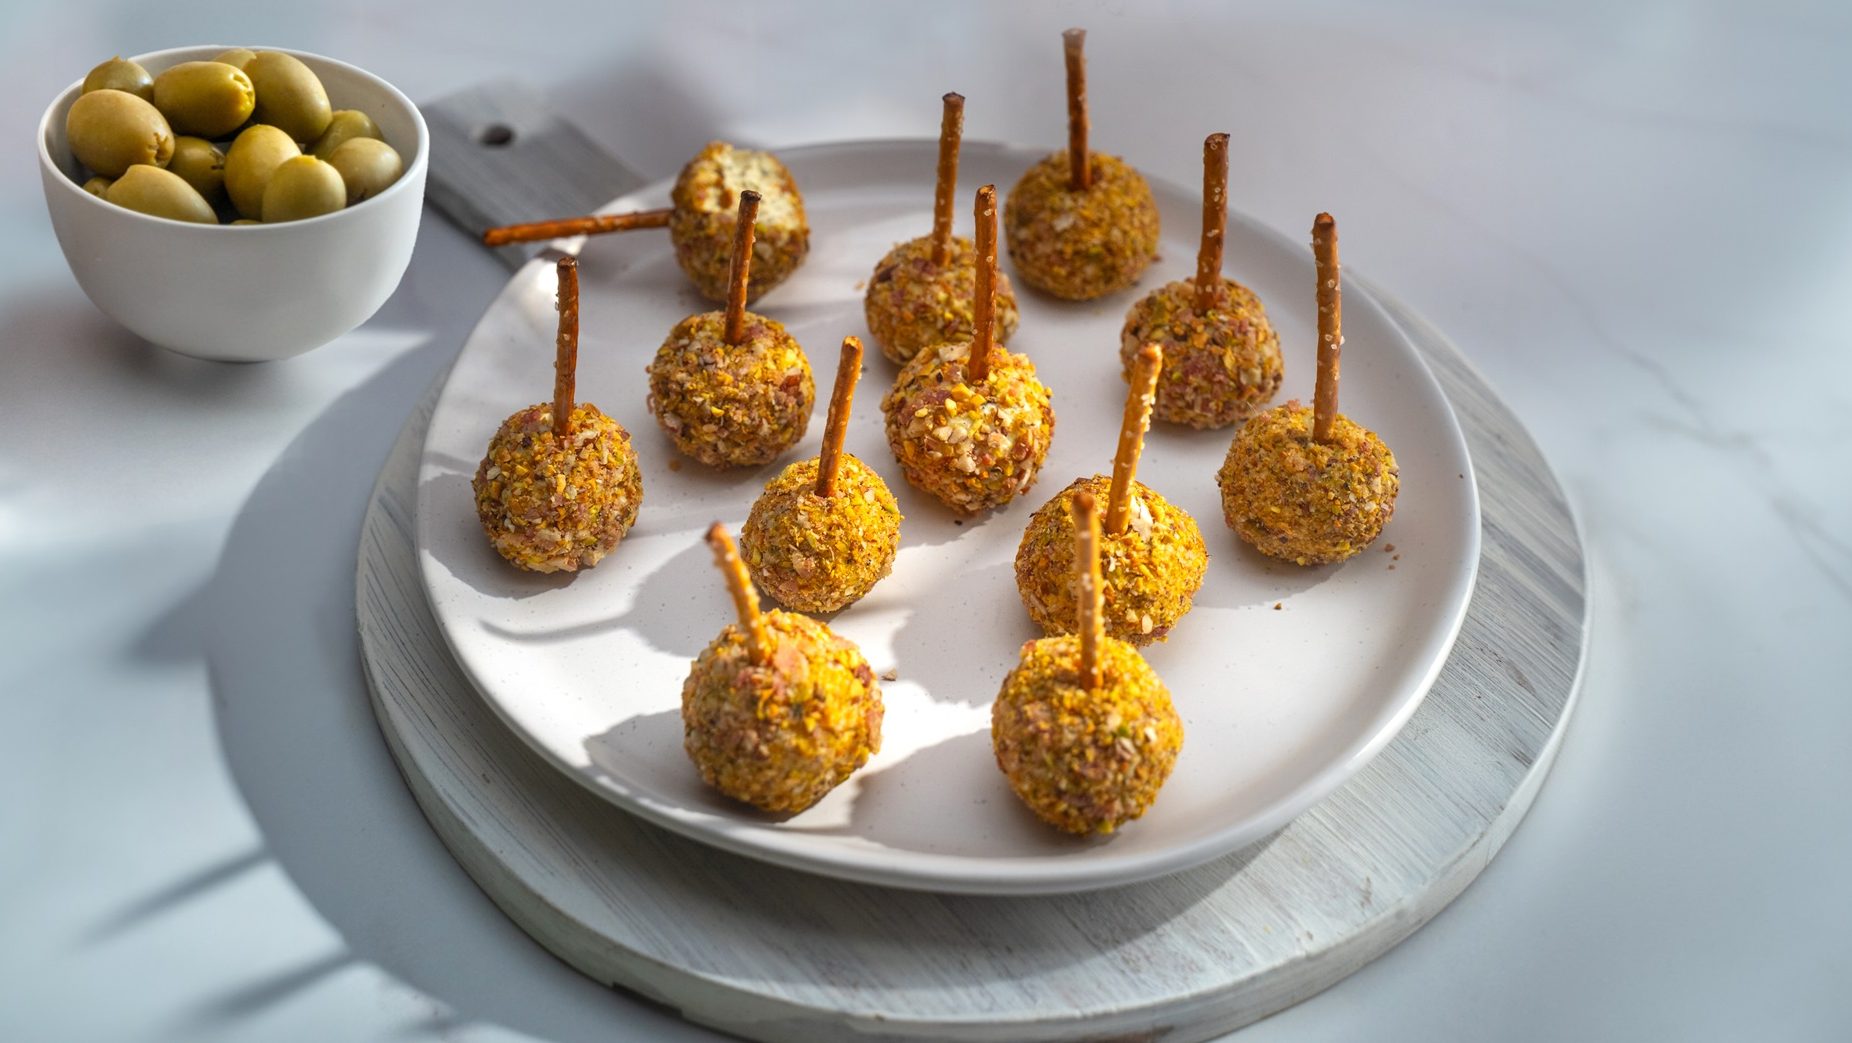 Twelve brown crusted balls with stick on a round white plate with a bowl green olives.